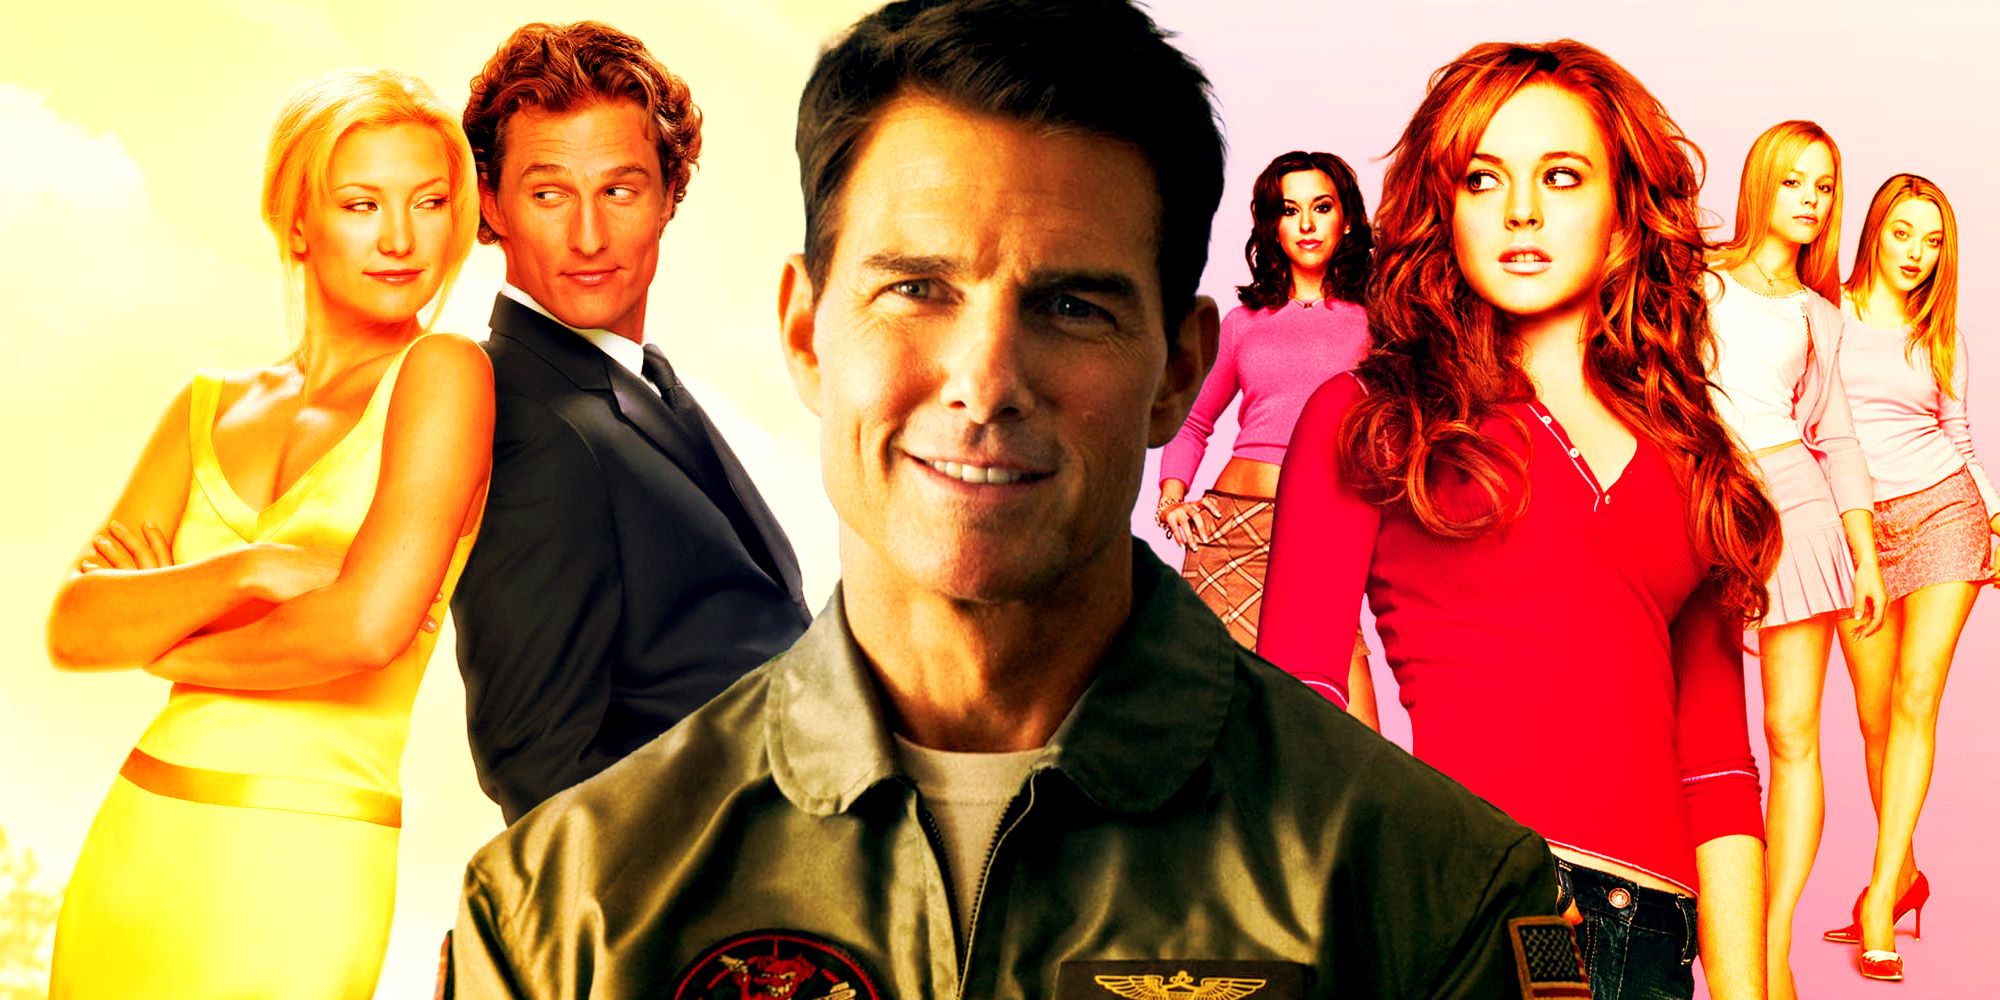 Collage of stills from How to Lose a Guy in 10 Days, Top Gun Maverick, and Mean Girls - Paramount